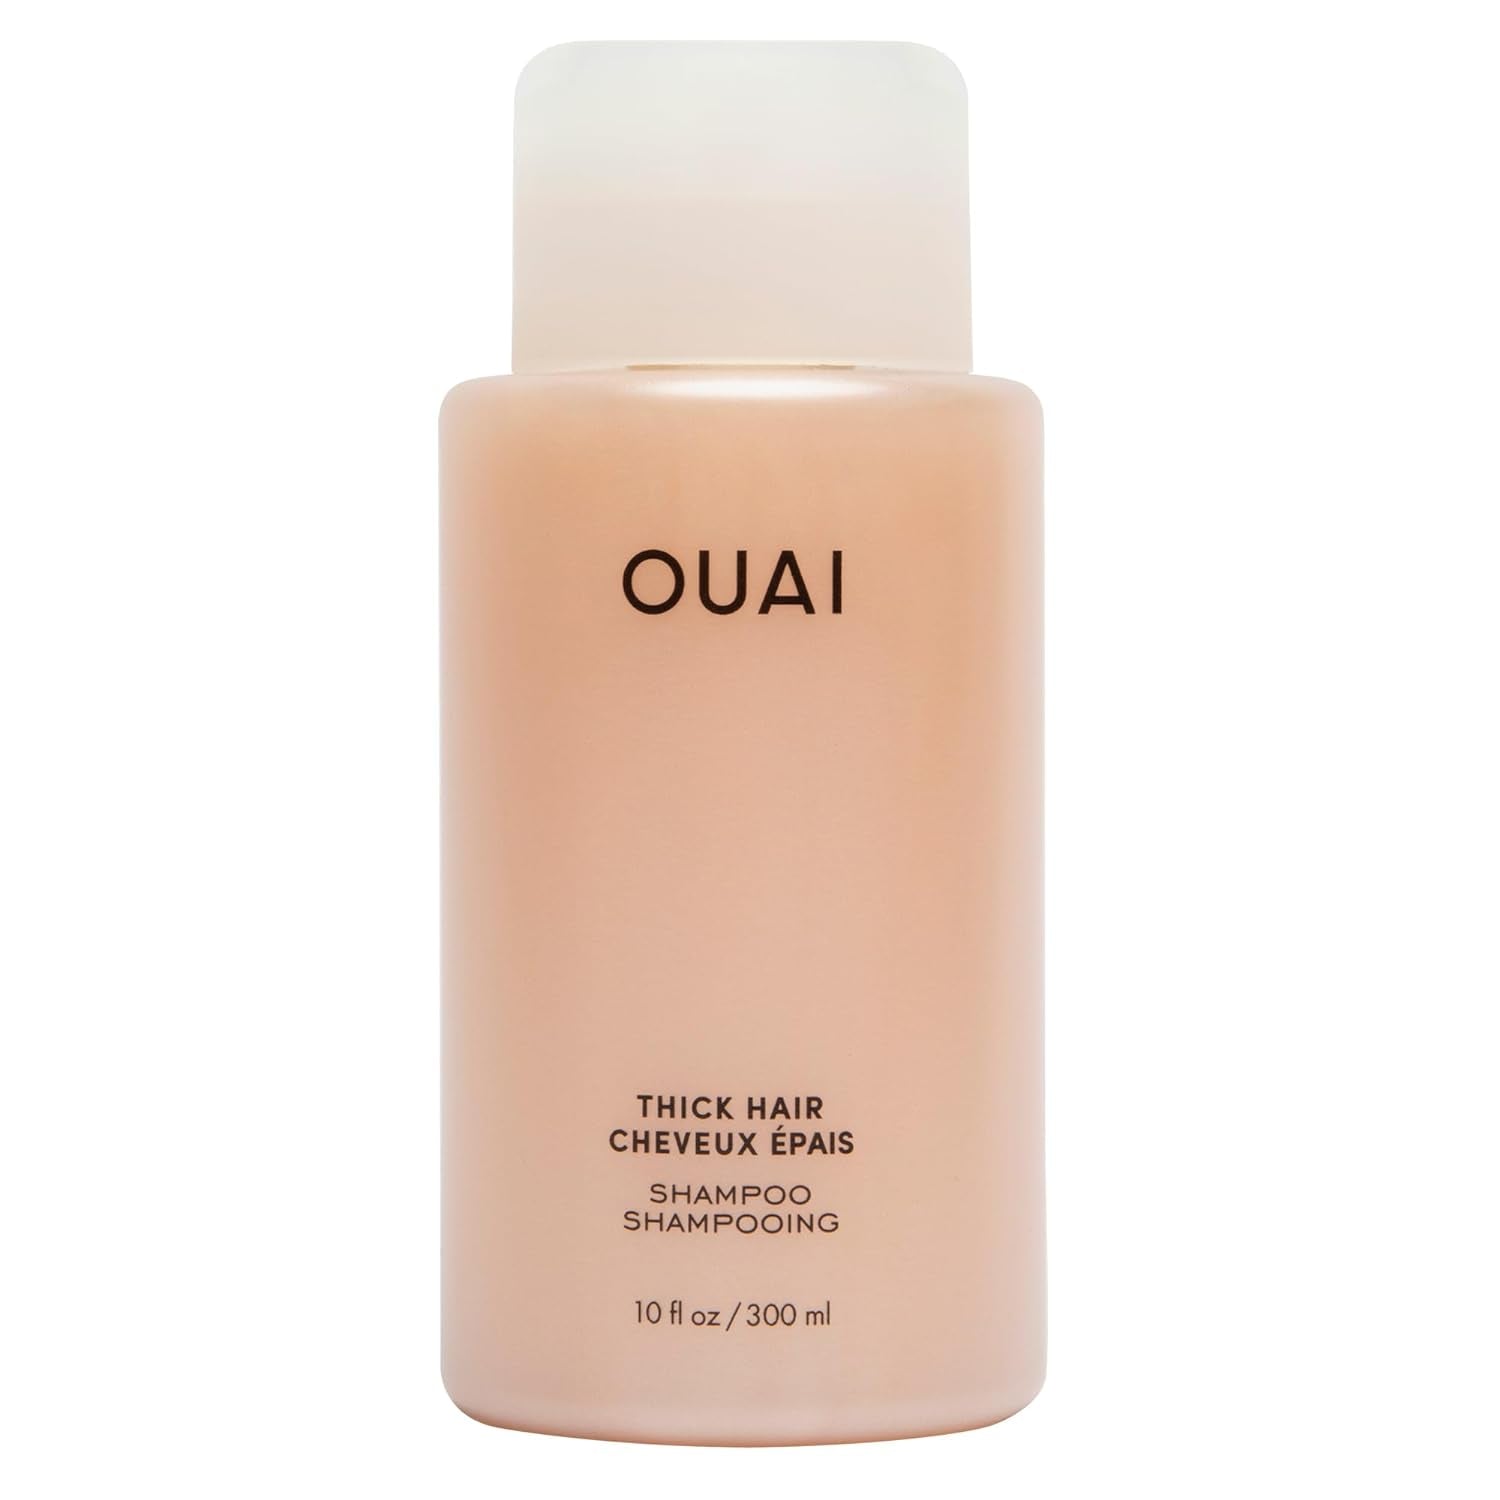 OUAI Fine Shampoo - Volumizing Shampoo with Strengthening Keratin, Biotin & Chia Seed Oil for Fine Hair - Delivers Clean, Weightless Body - Paraben, Phthalate & Sulfate Free Hair Care - 10 Fl Oz